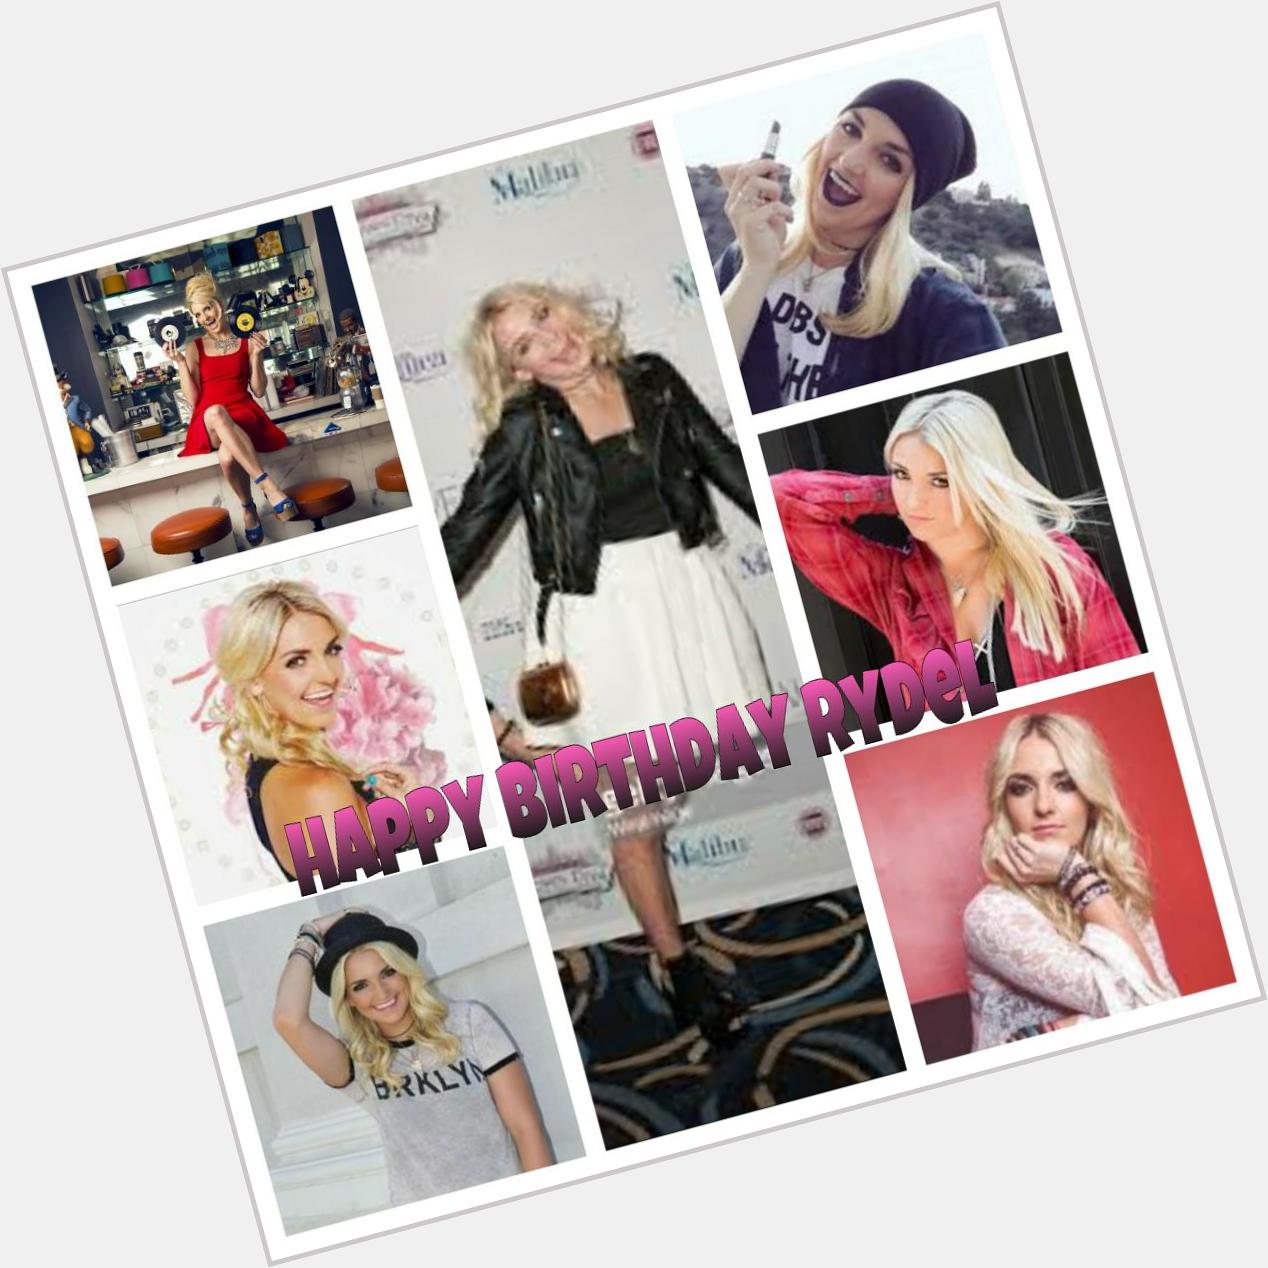 Today was born a beautiful woman who is always happy, she is my idol and called Rydel Lynch. Happy birthday 